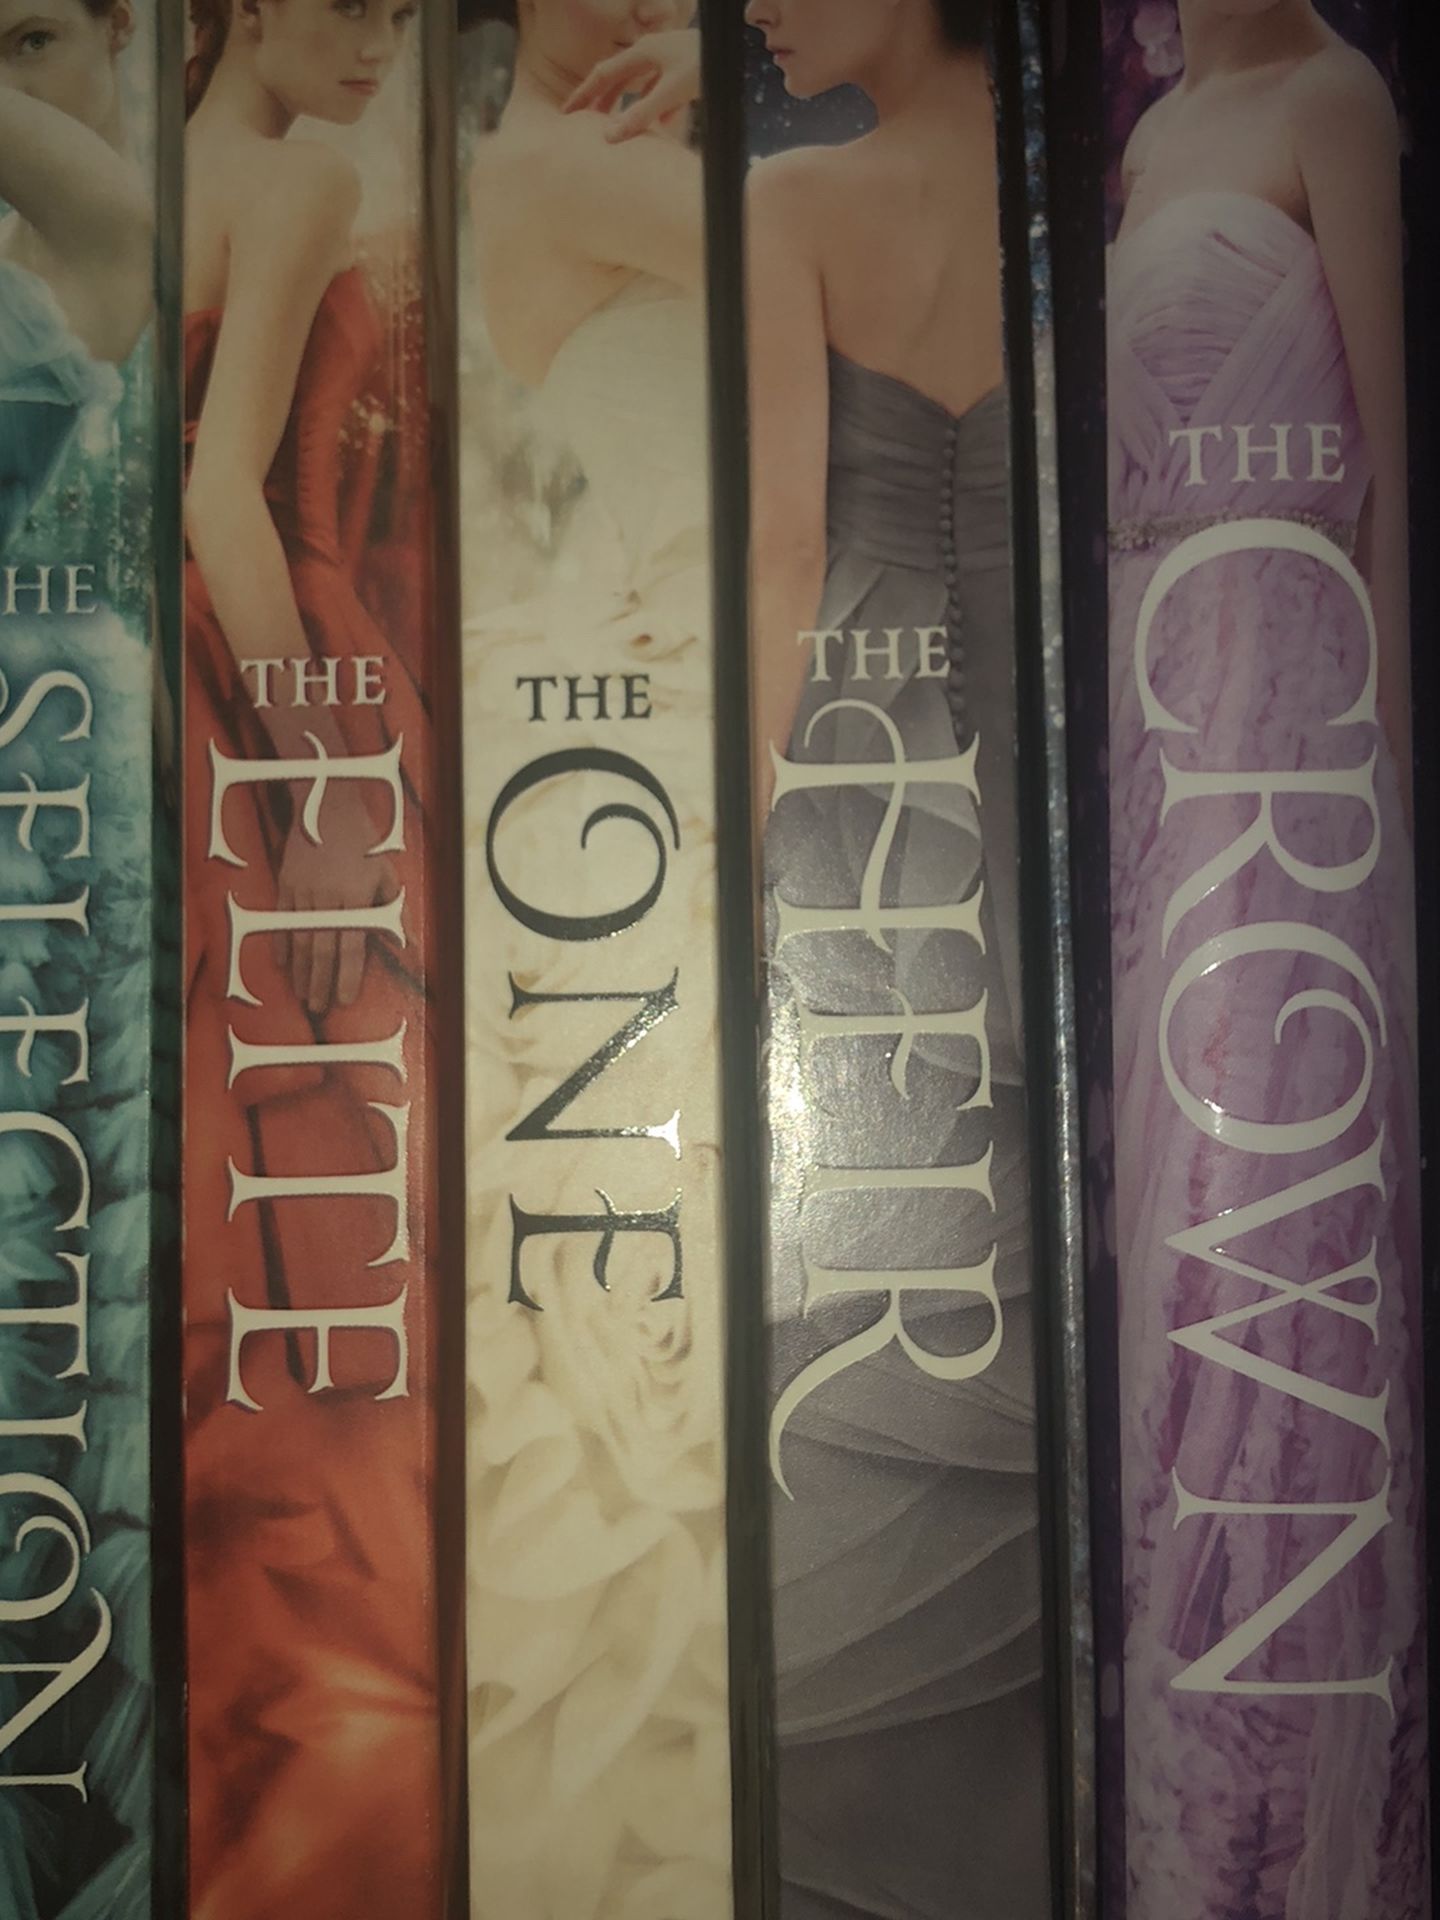 THE SELECTION SERIES + THE CROWN BOOKS